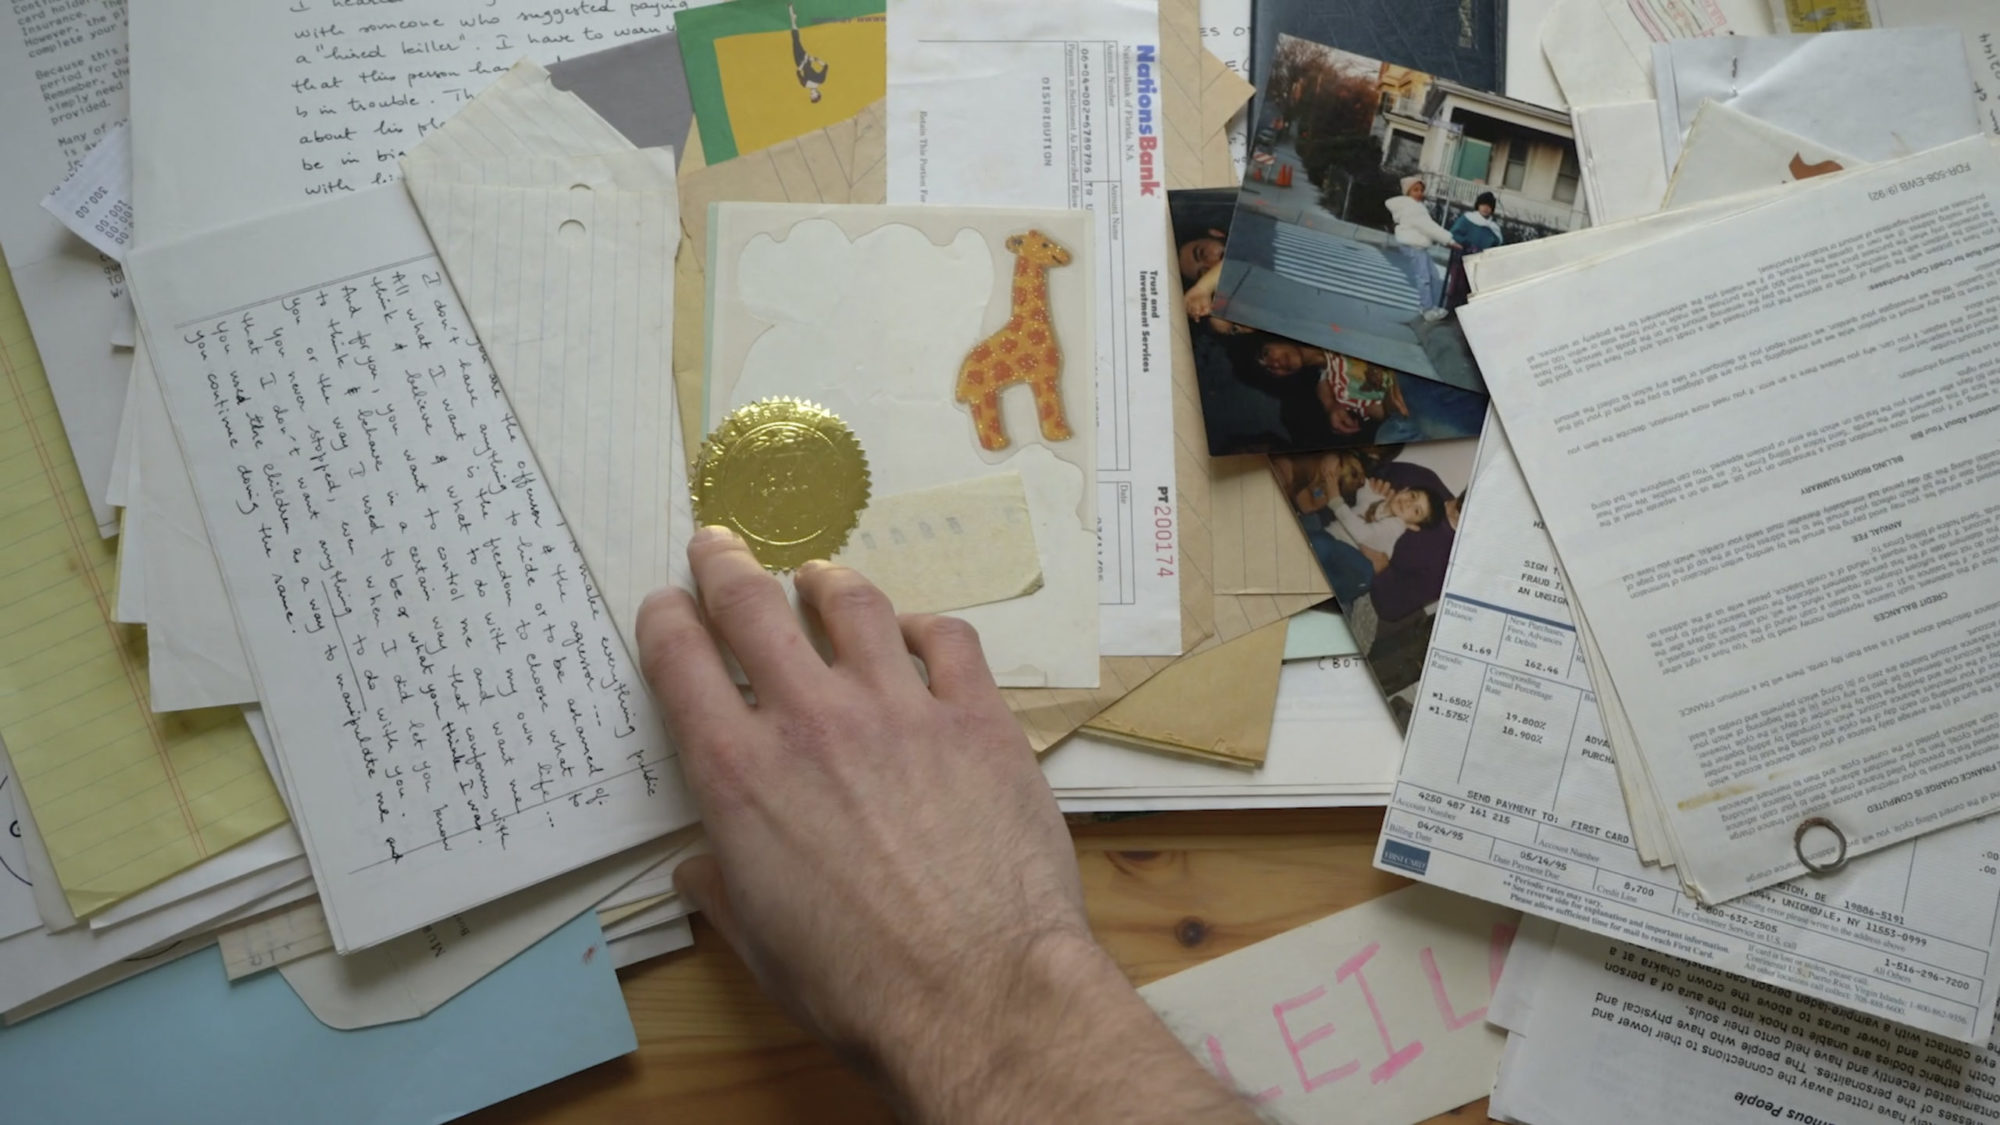 Image of a hand touching a pile of ephemera including stickers, photographs, old lettrs, certificates, and offiicial-looking documents.